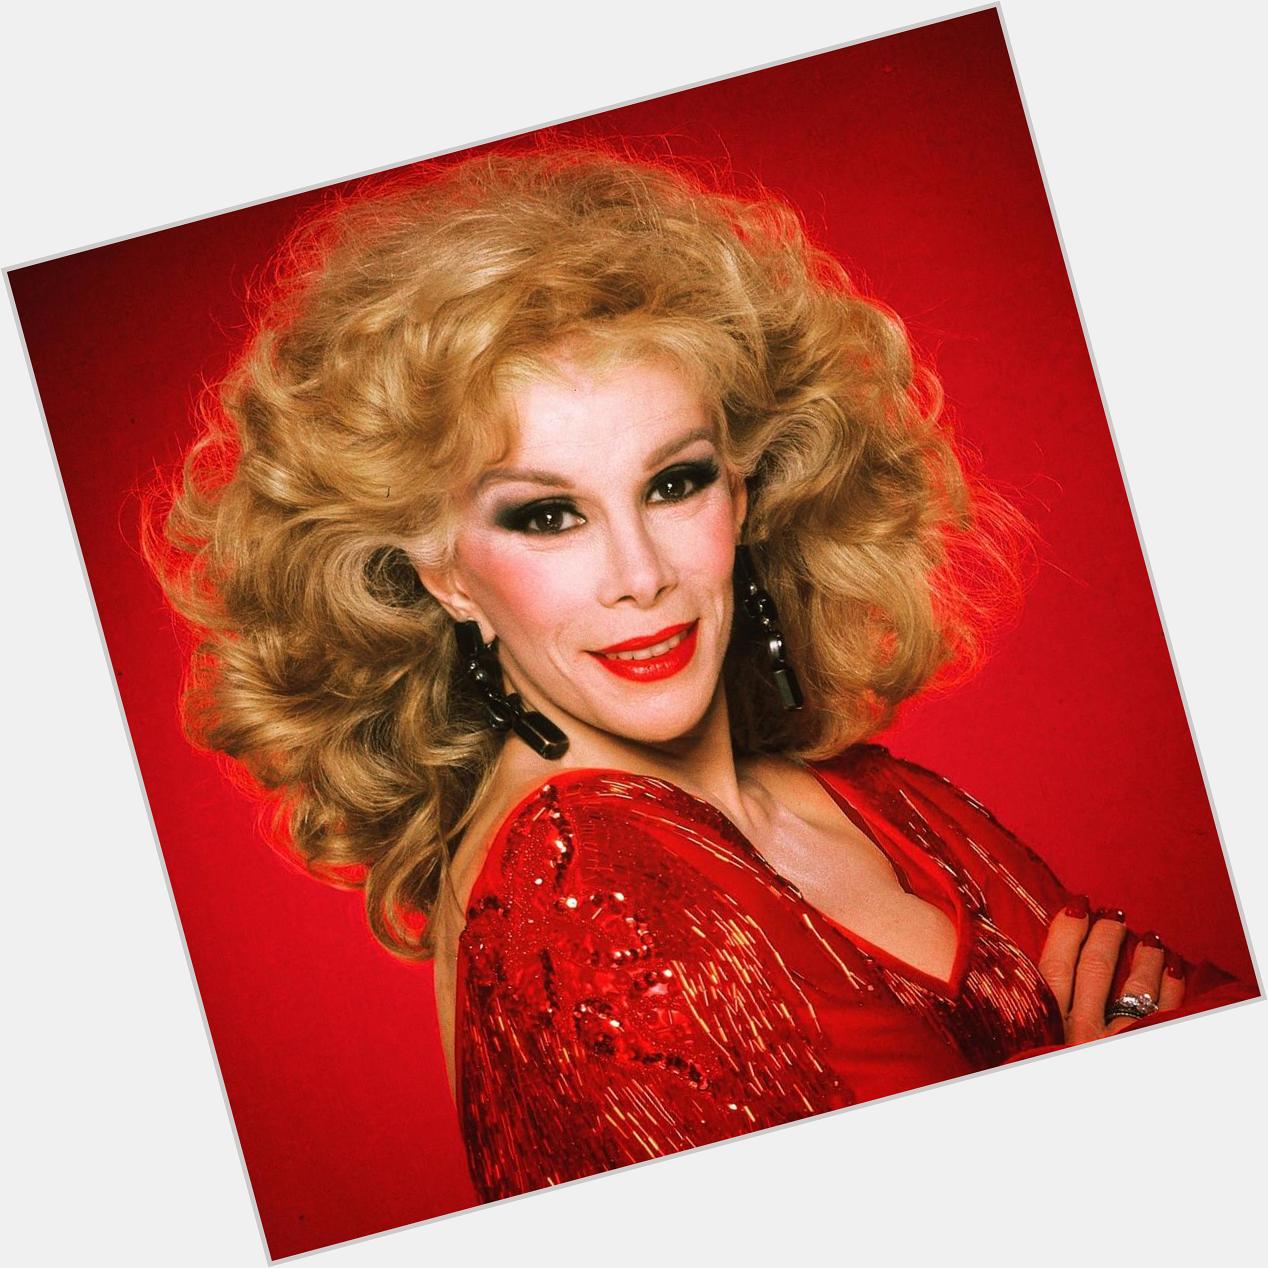 Happy birthday, you glorious potty mouth, you. We miss you, Joan. 